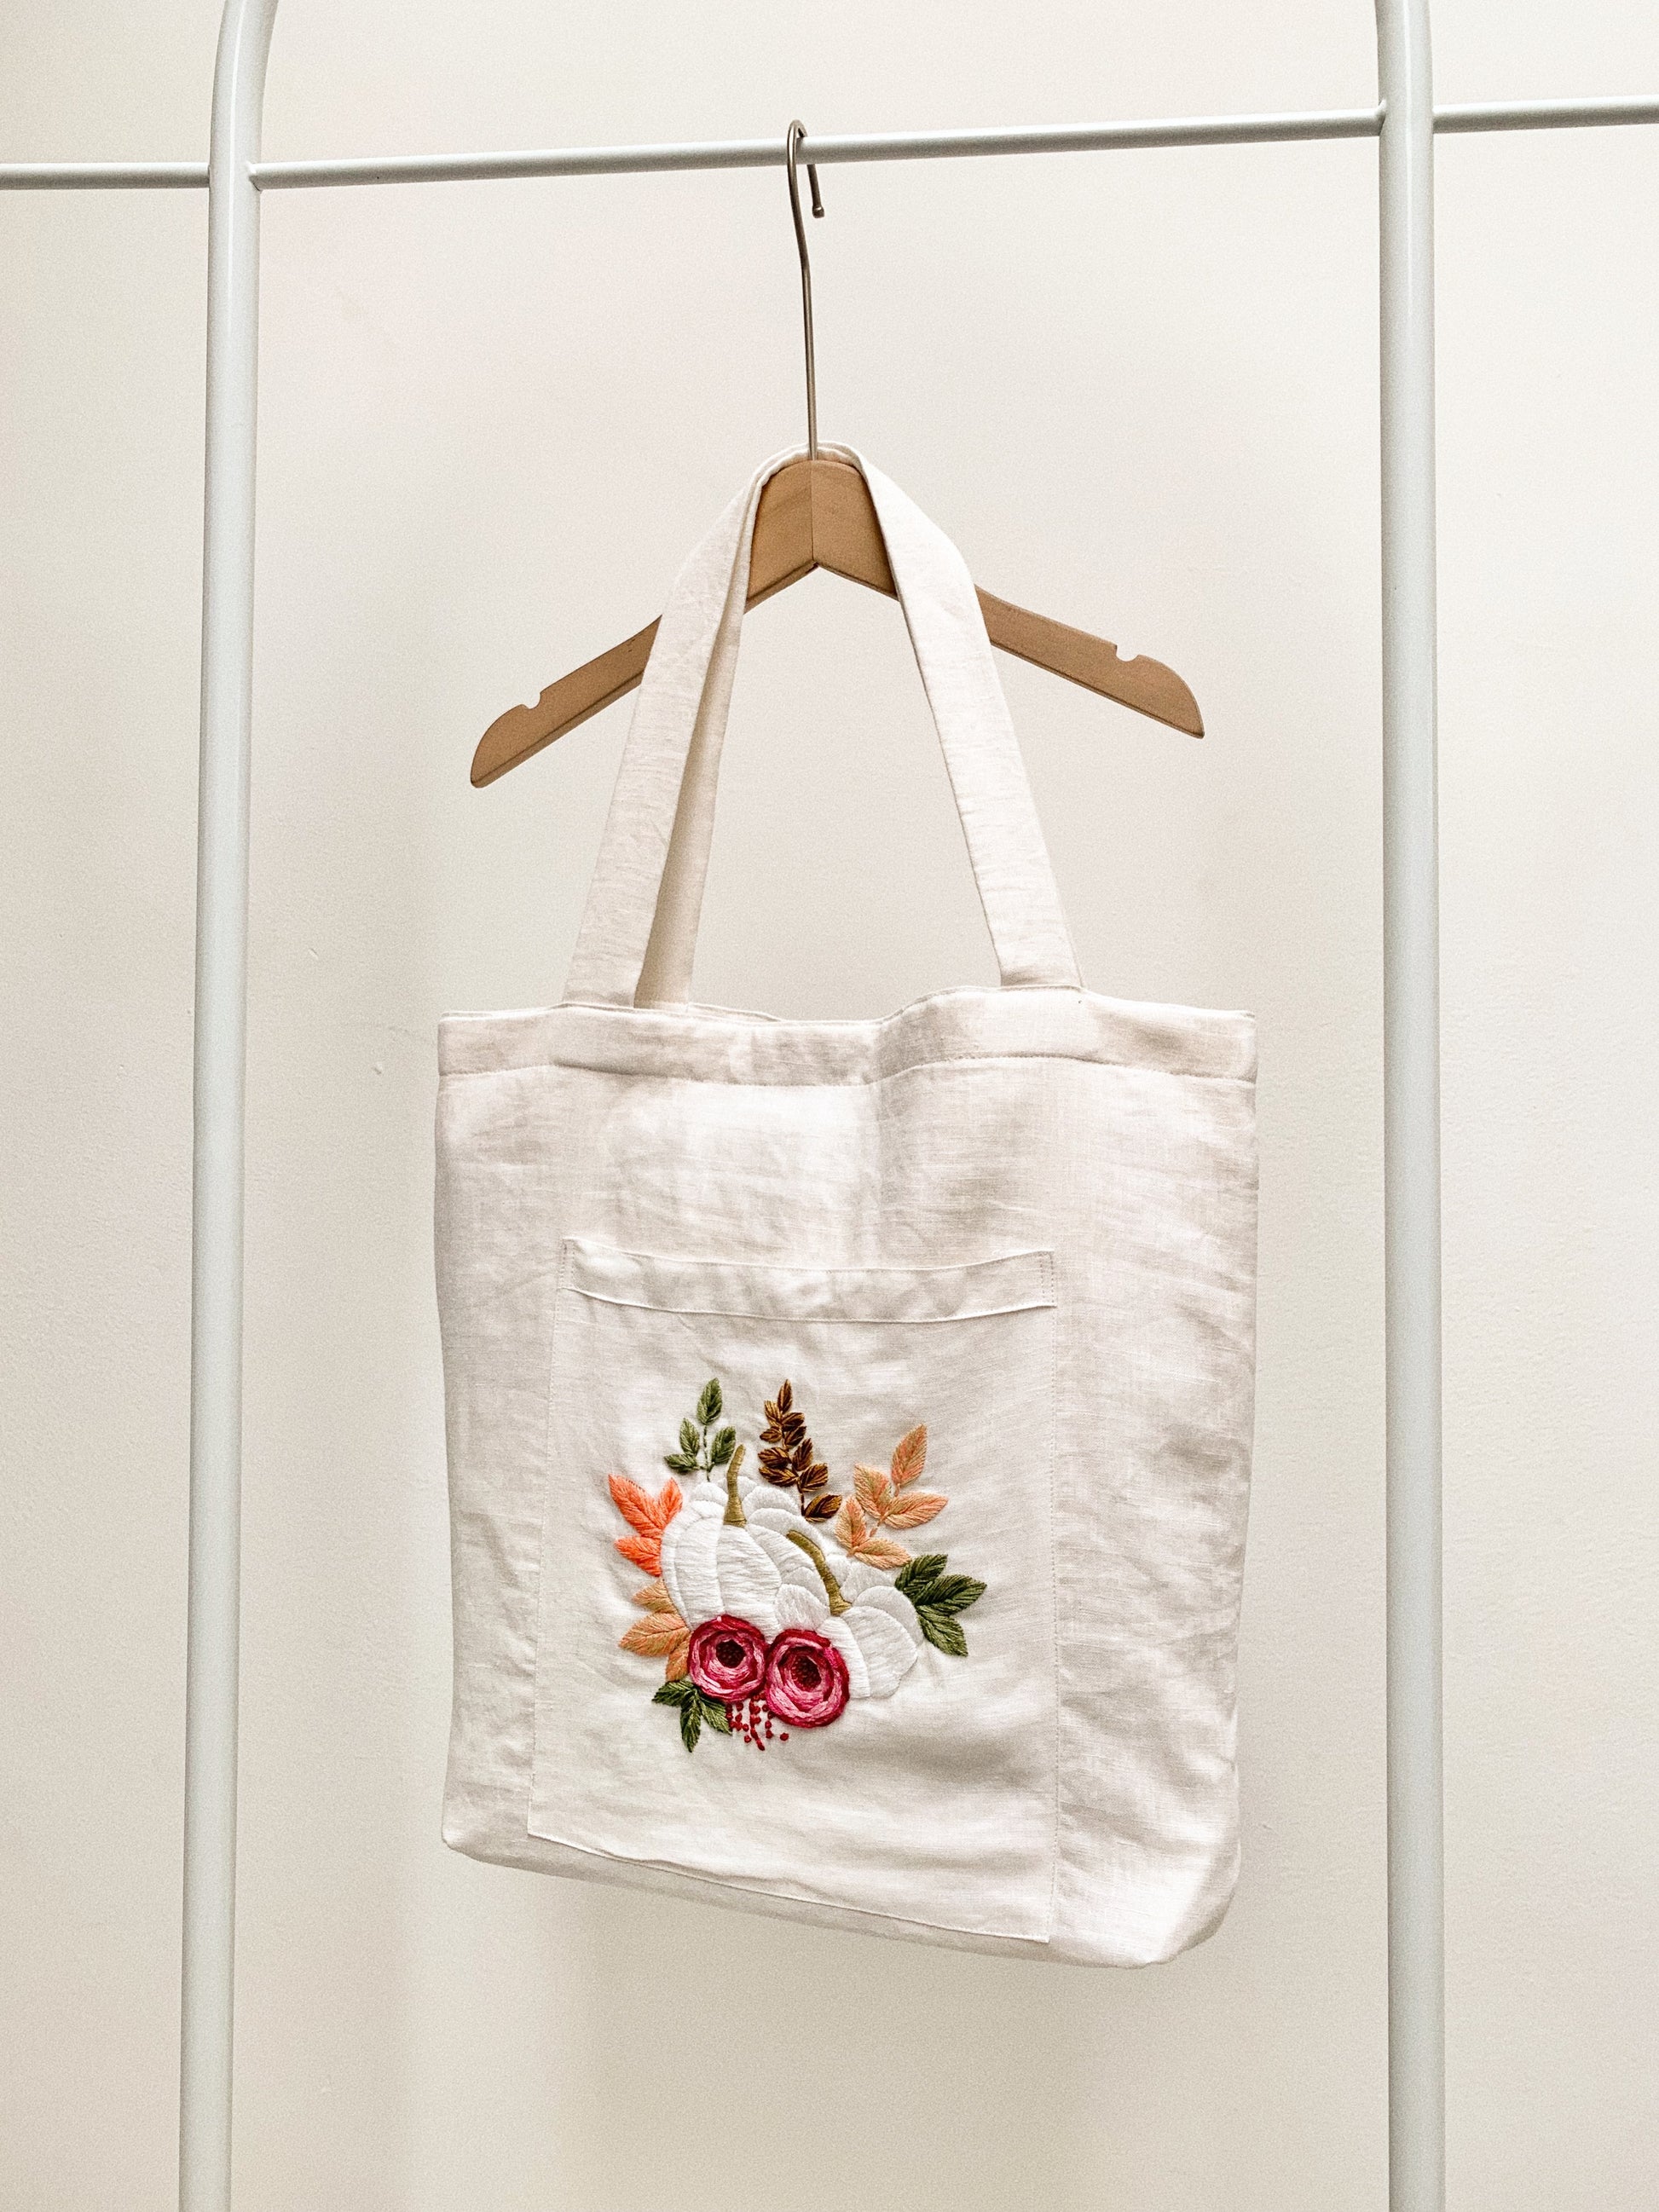 Hand embroidered linen tote bag with pumpkin design